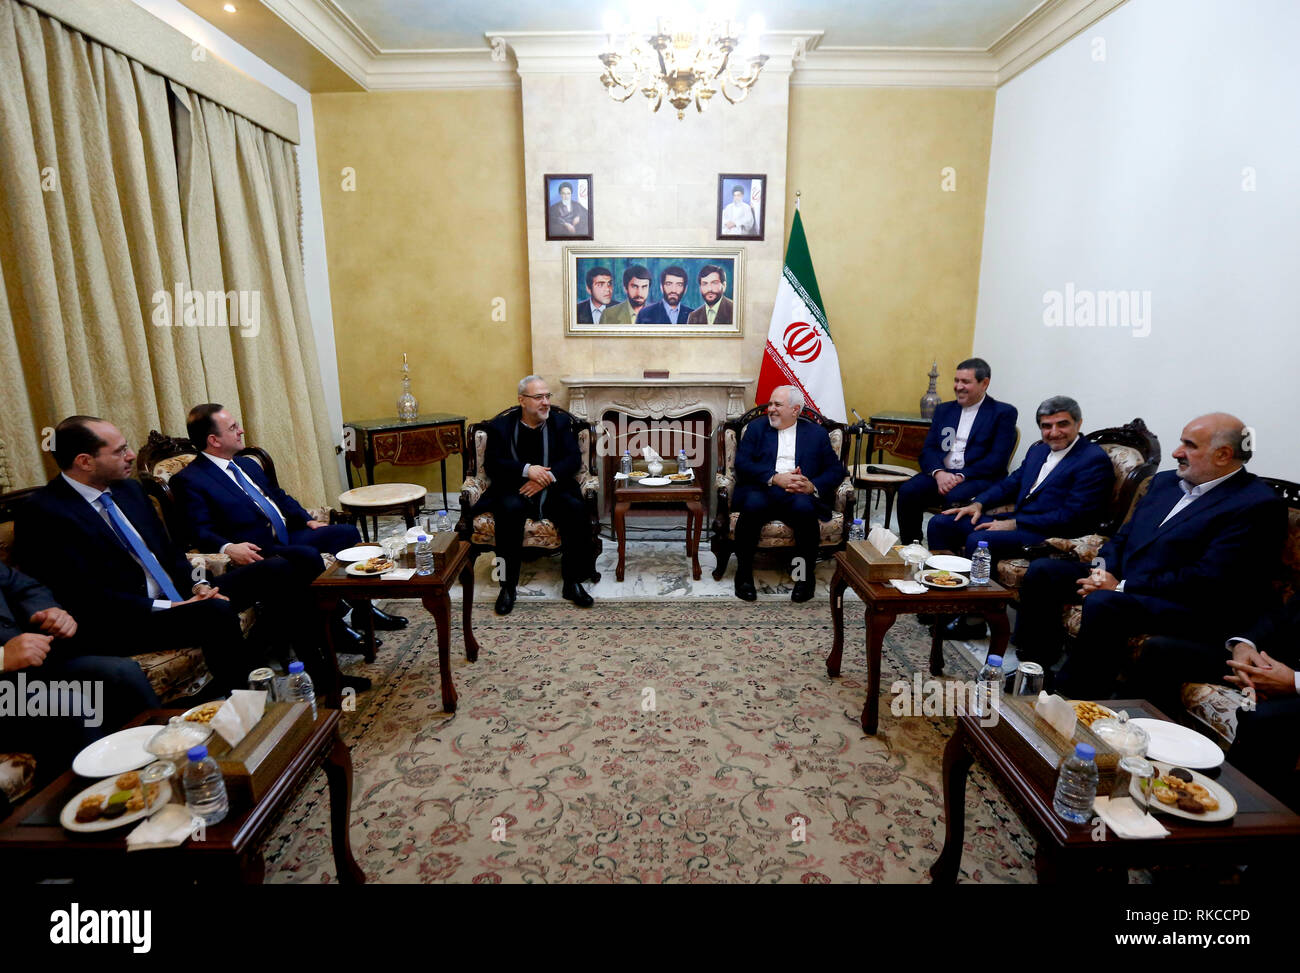 Beirut, Lebanon. 10th Feb, 2019. Iranian Foreign Minister Mohammad Javad Zarif (4th R) meets with Lebanese officials in the Iranian Embassy in Beirut, Lebanon, on Feb. 10, 2019. Zarif arrived in Lebanon on Sunday for a two-day official visit to meet with Lebanese officials and informed them about Iran's readiness to help Lebanon on all levels. Credit: Bilal Jawich/Xinhua/Alamy Live News Stock Photo